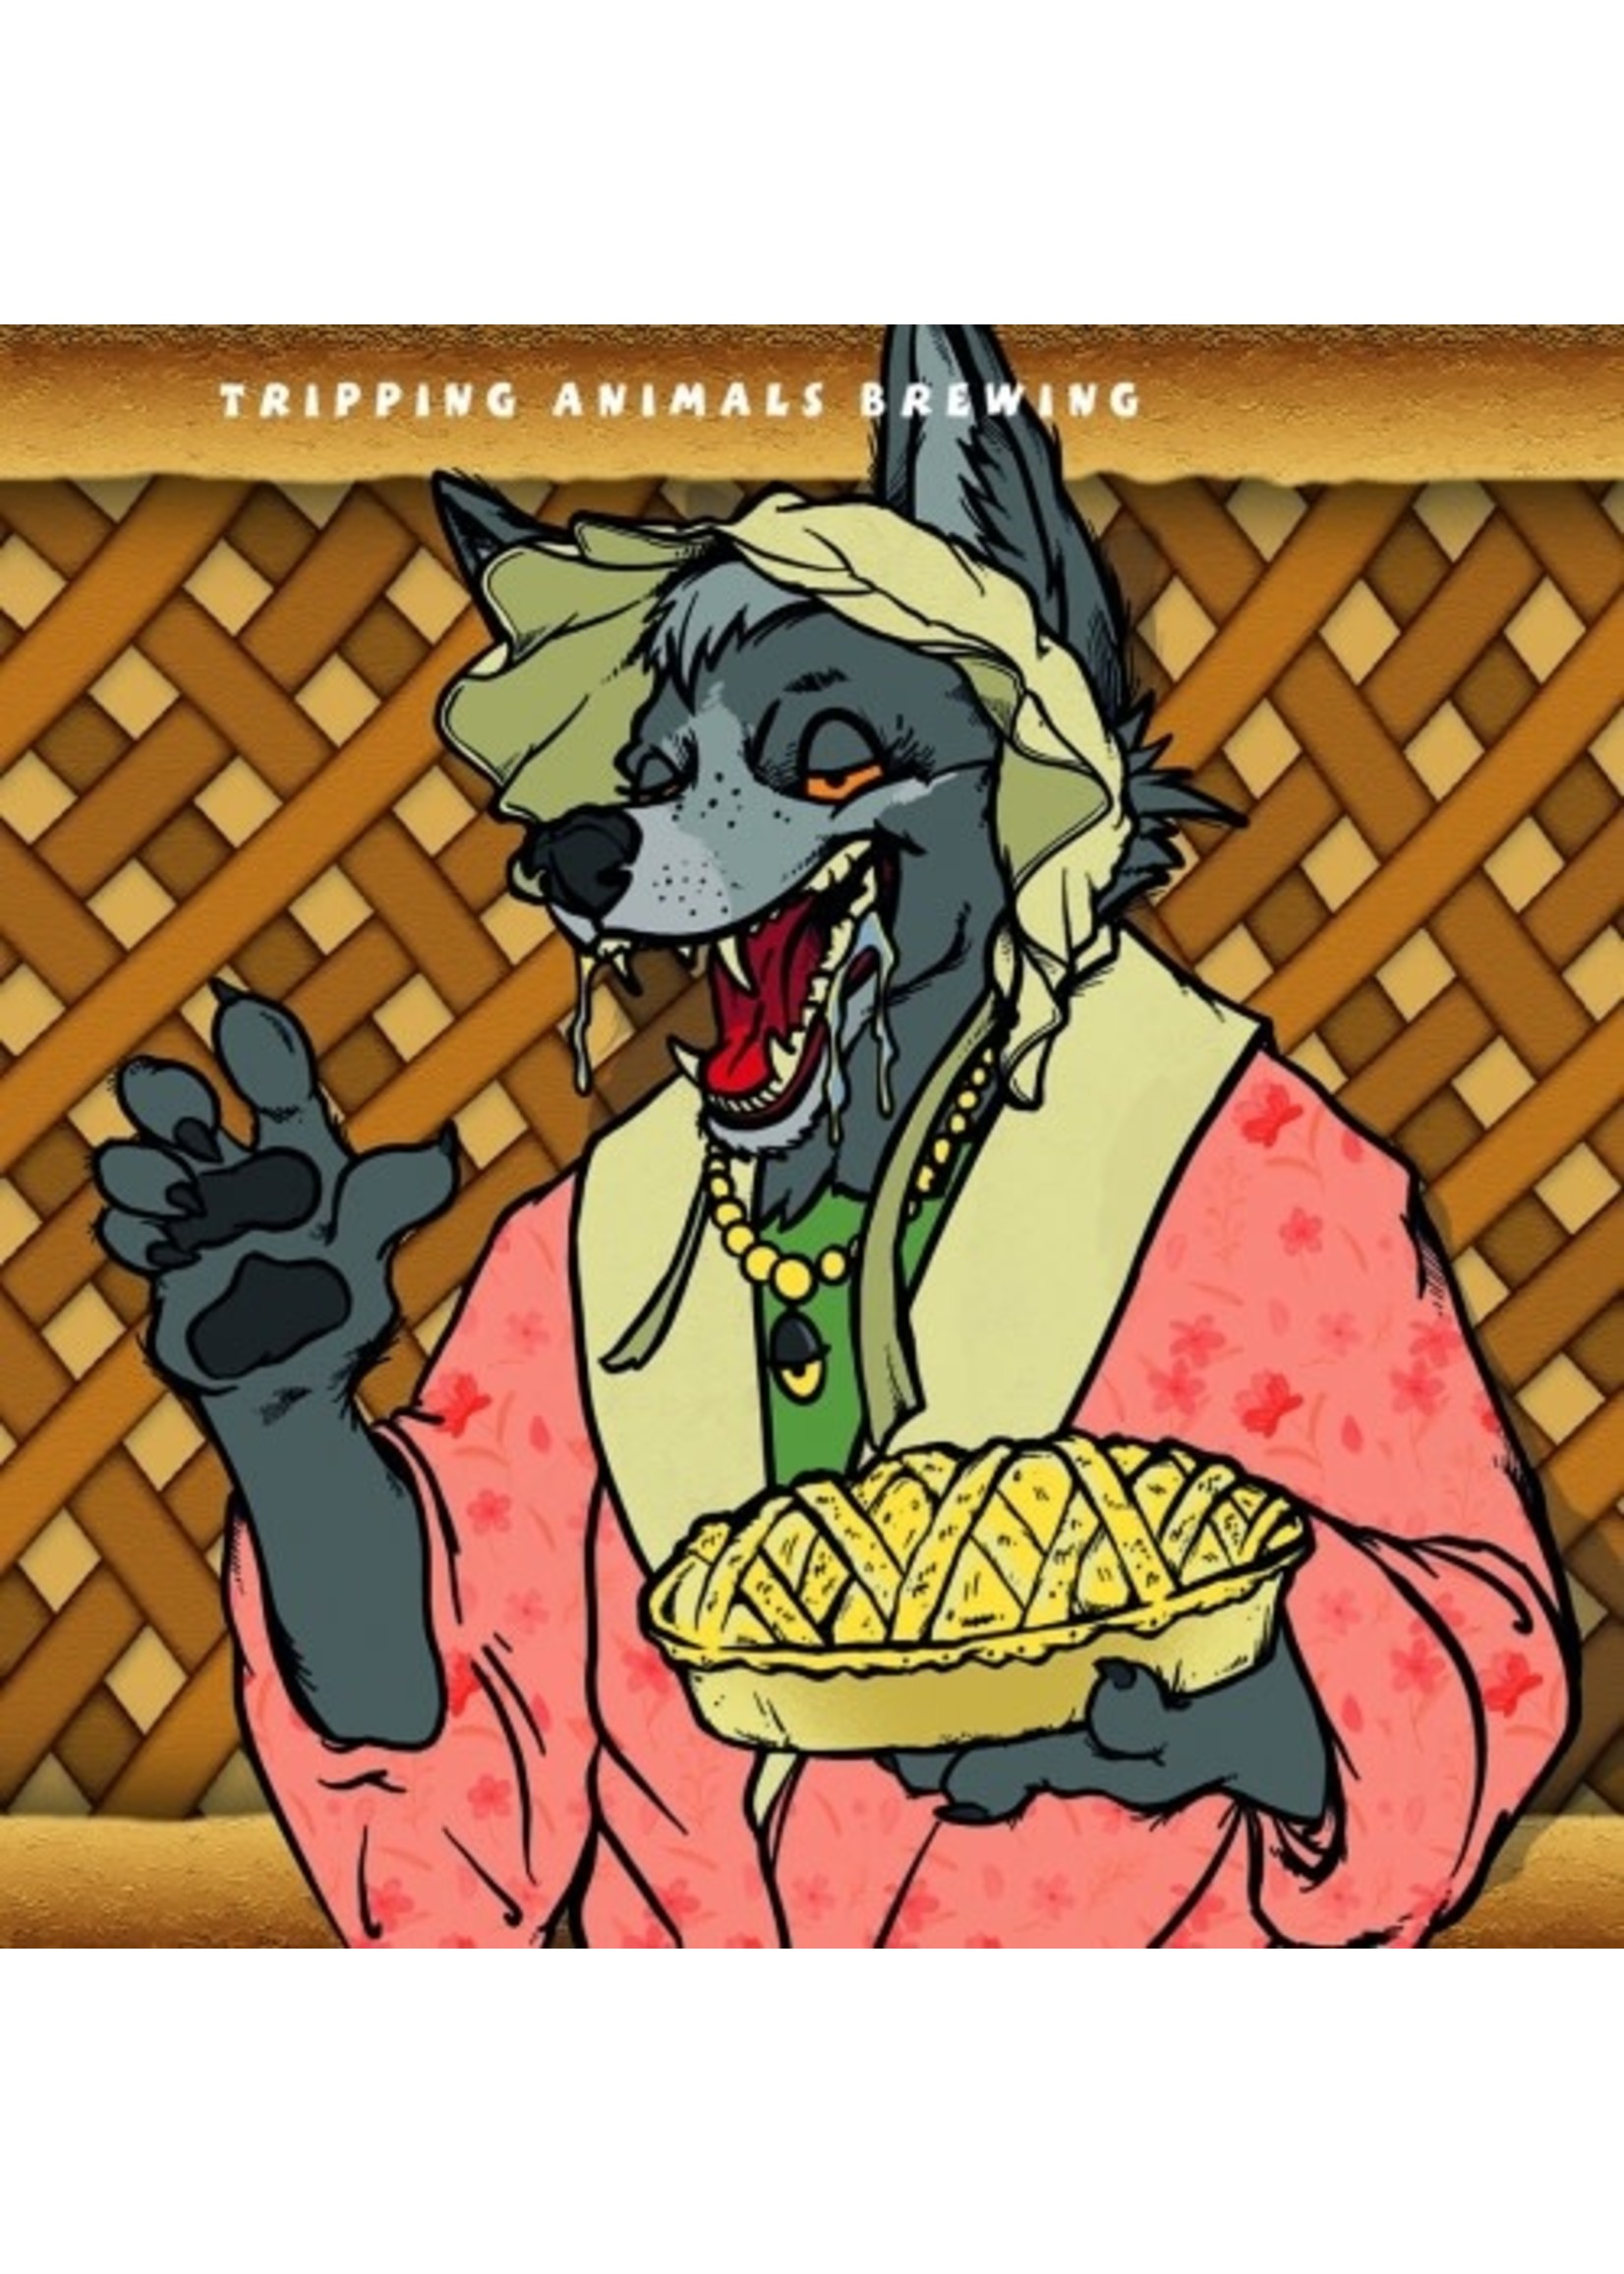 Tripping Animals Brewery Beer 4Pack - Tripping Animals Brewery - Hairy Grandma Fingers